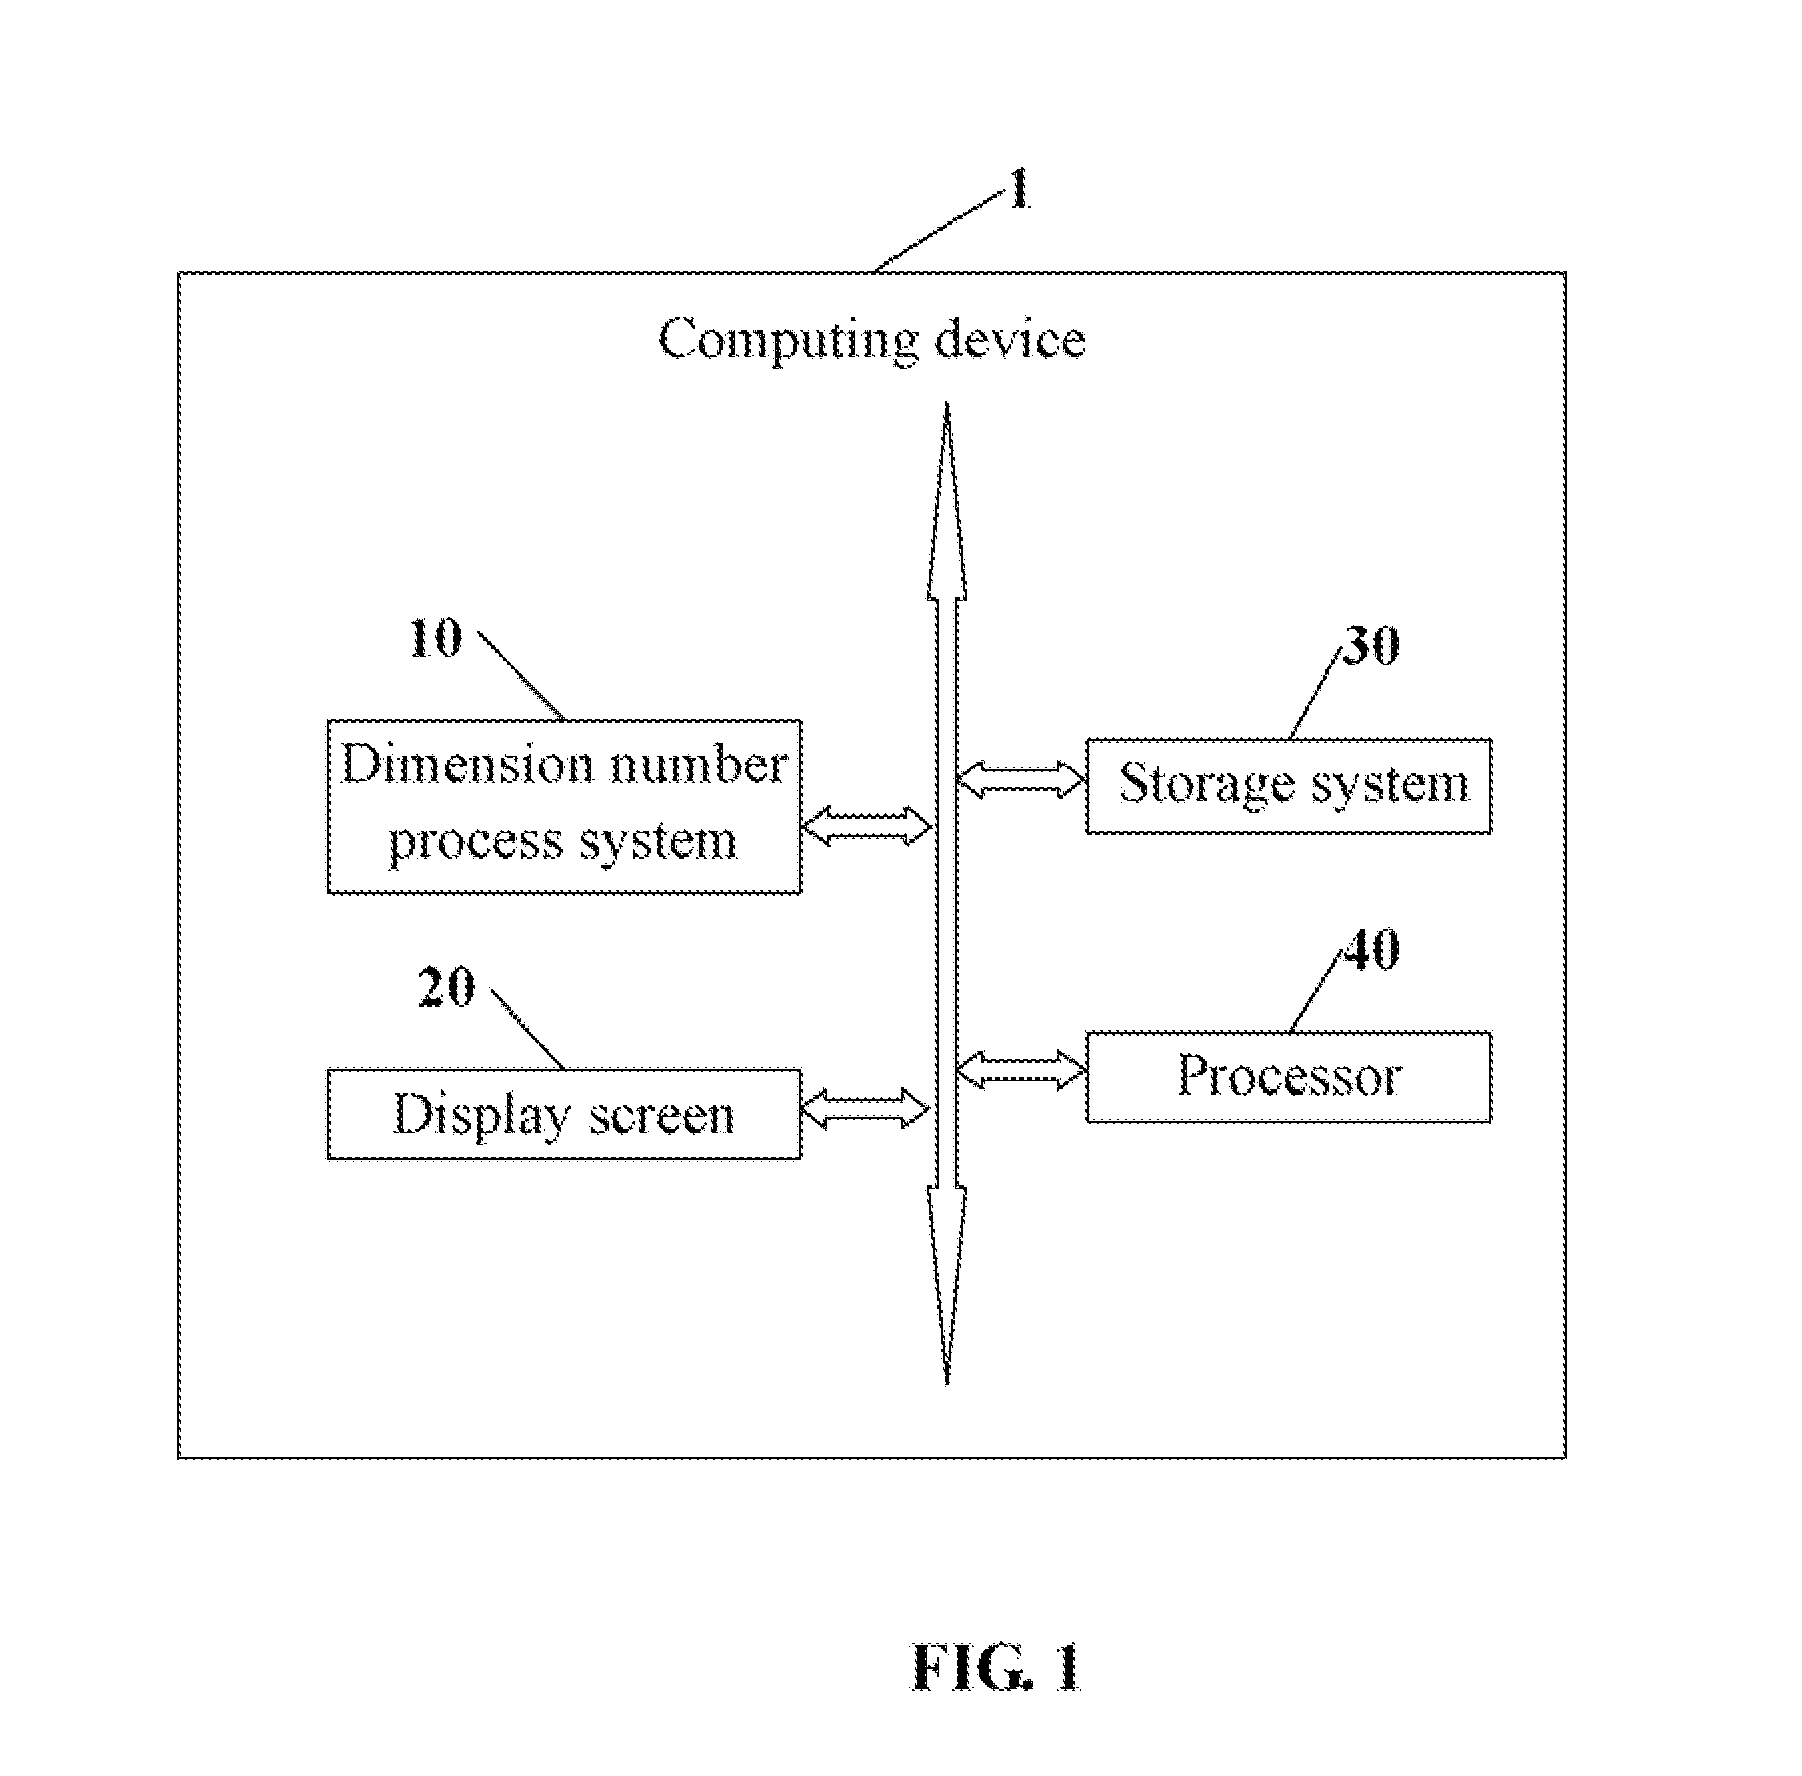 Computing device, storage medium and method for processing dimension numbers using the computing device